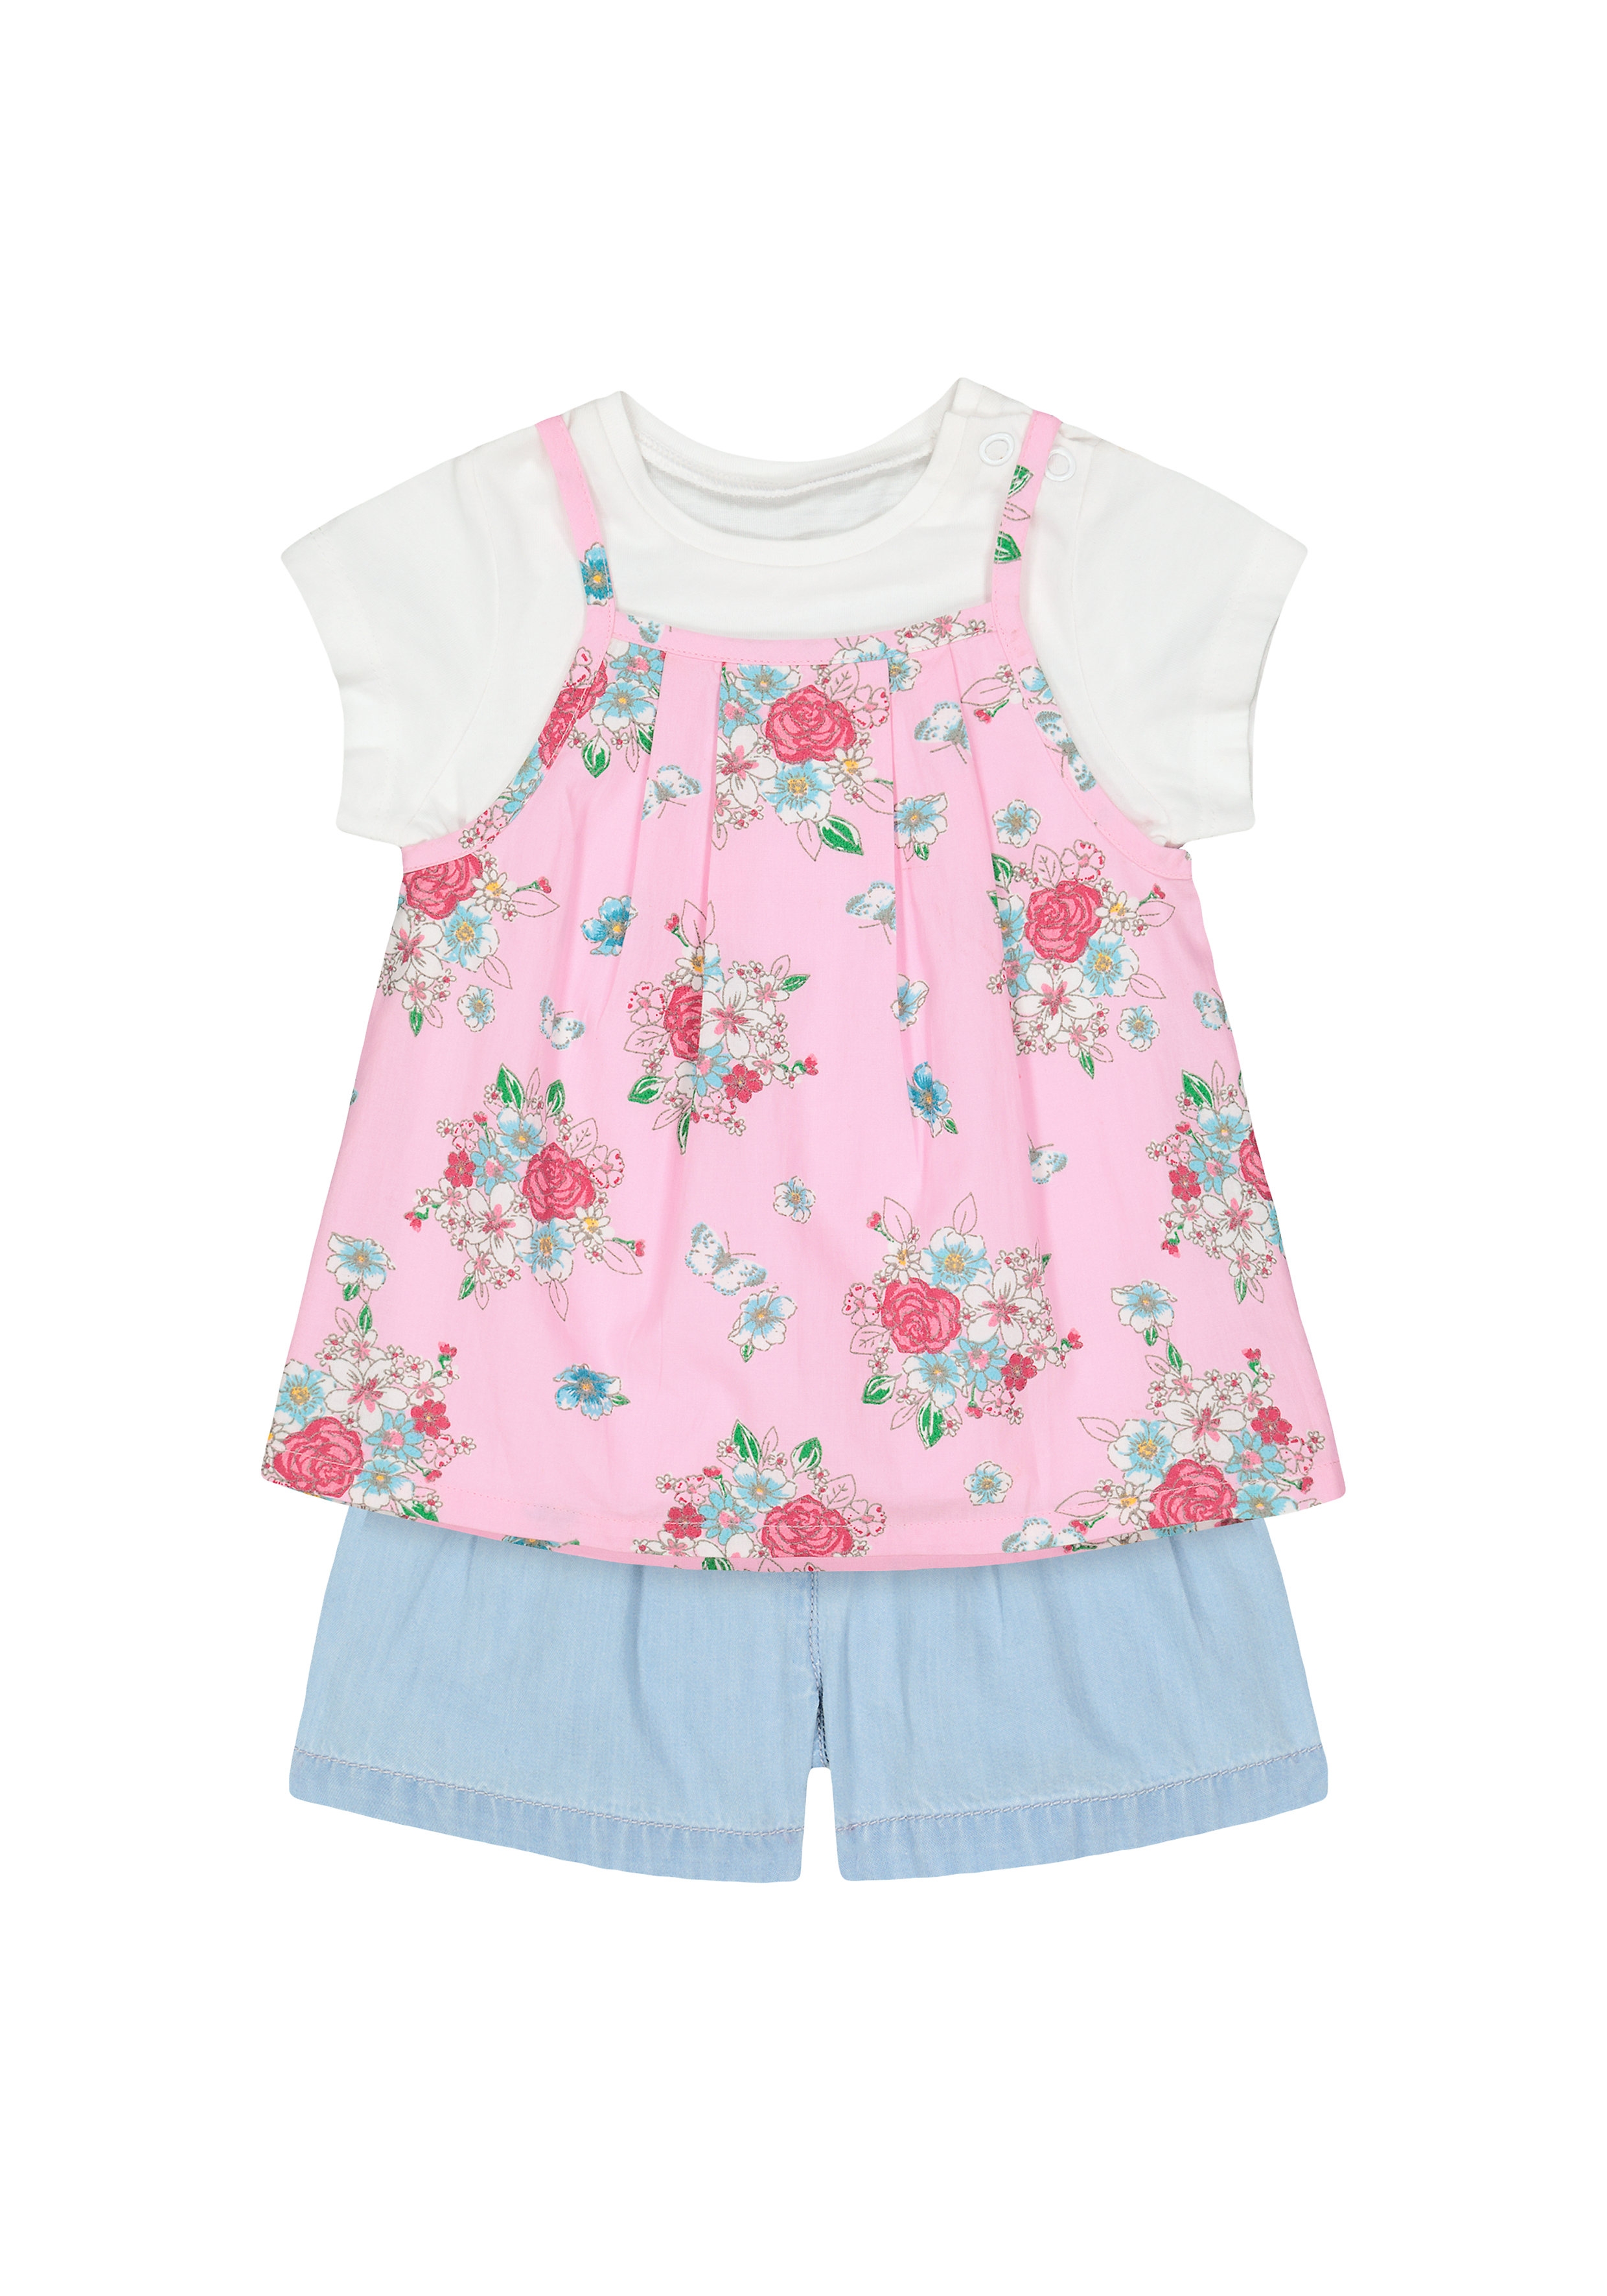 Mothercare | Girls Half Sleeves T-Shirt And Shorts Set Floral Print - Multicolor